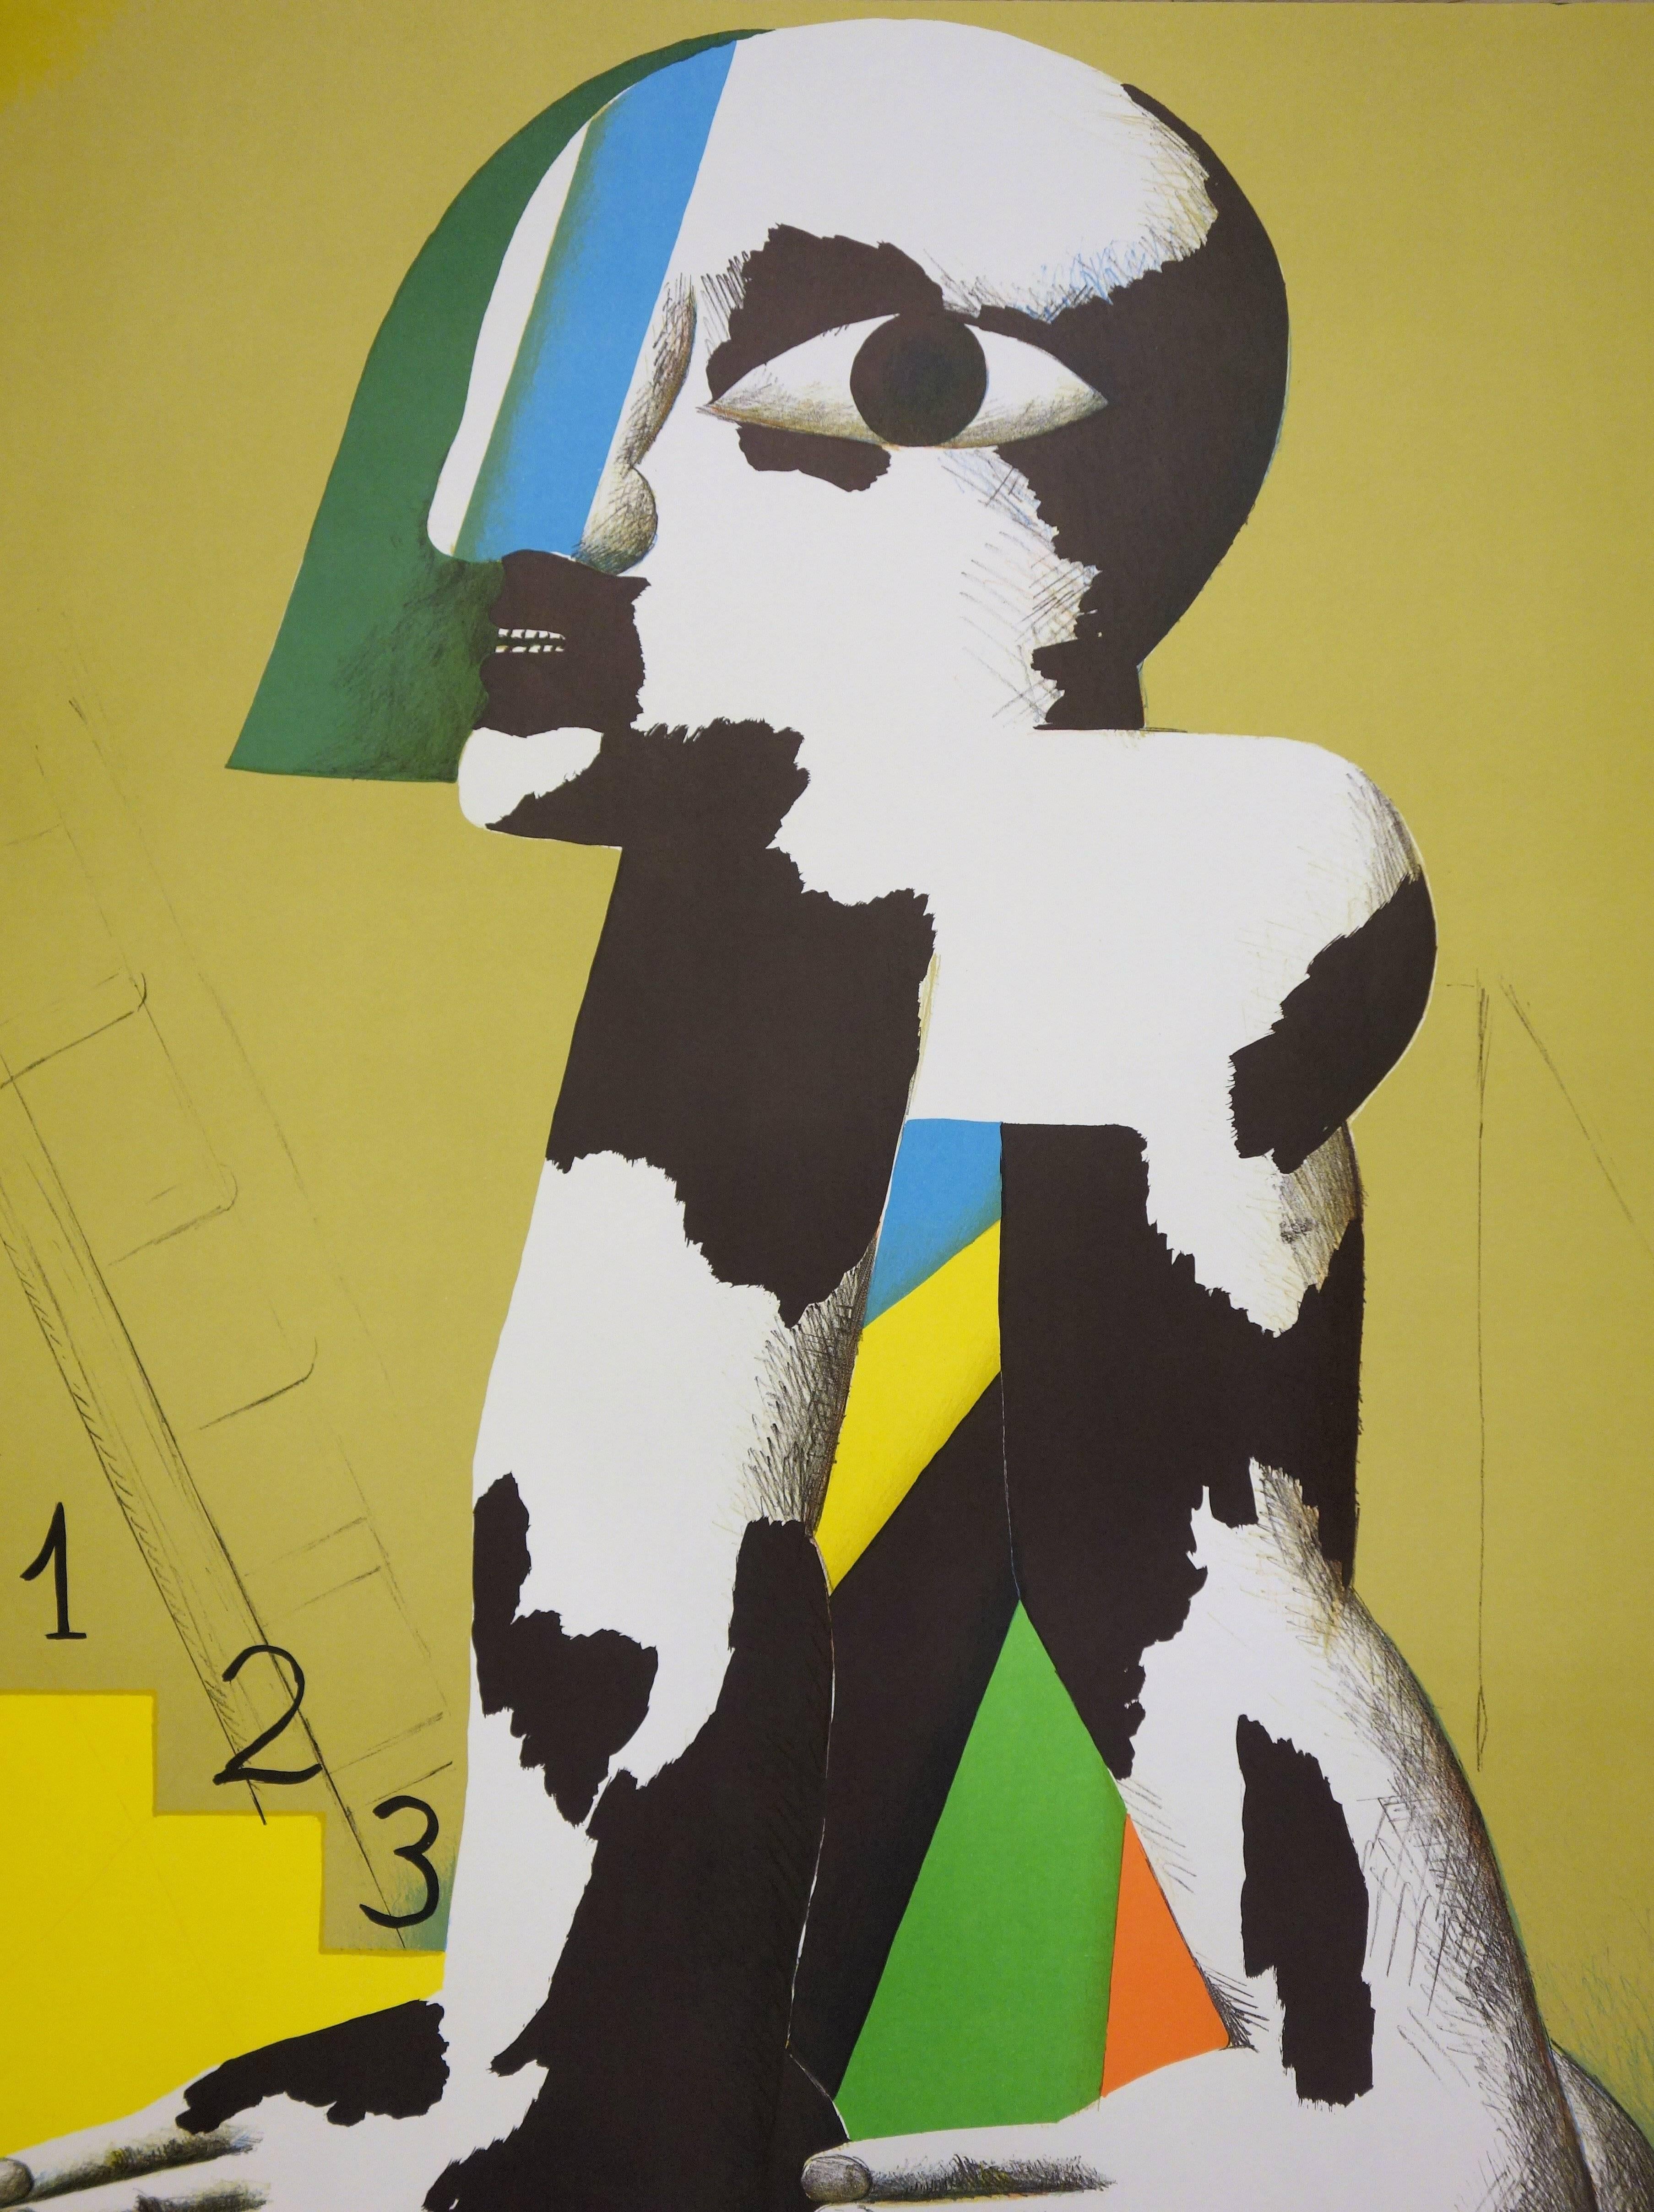 Sport : At the Foot of the Podium - Lithograph (Olympic Games Munich 1972) - Brown Figurative Print by Horst Antes